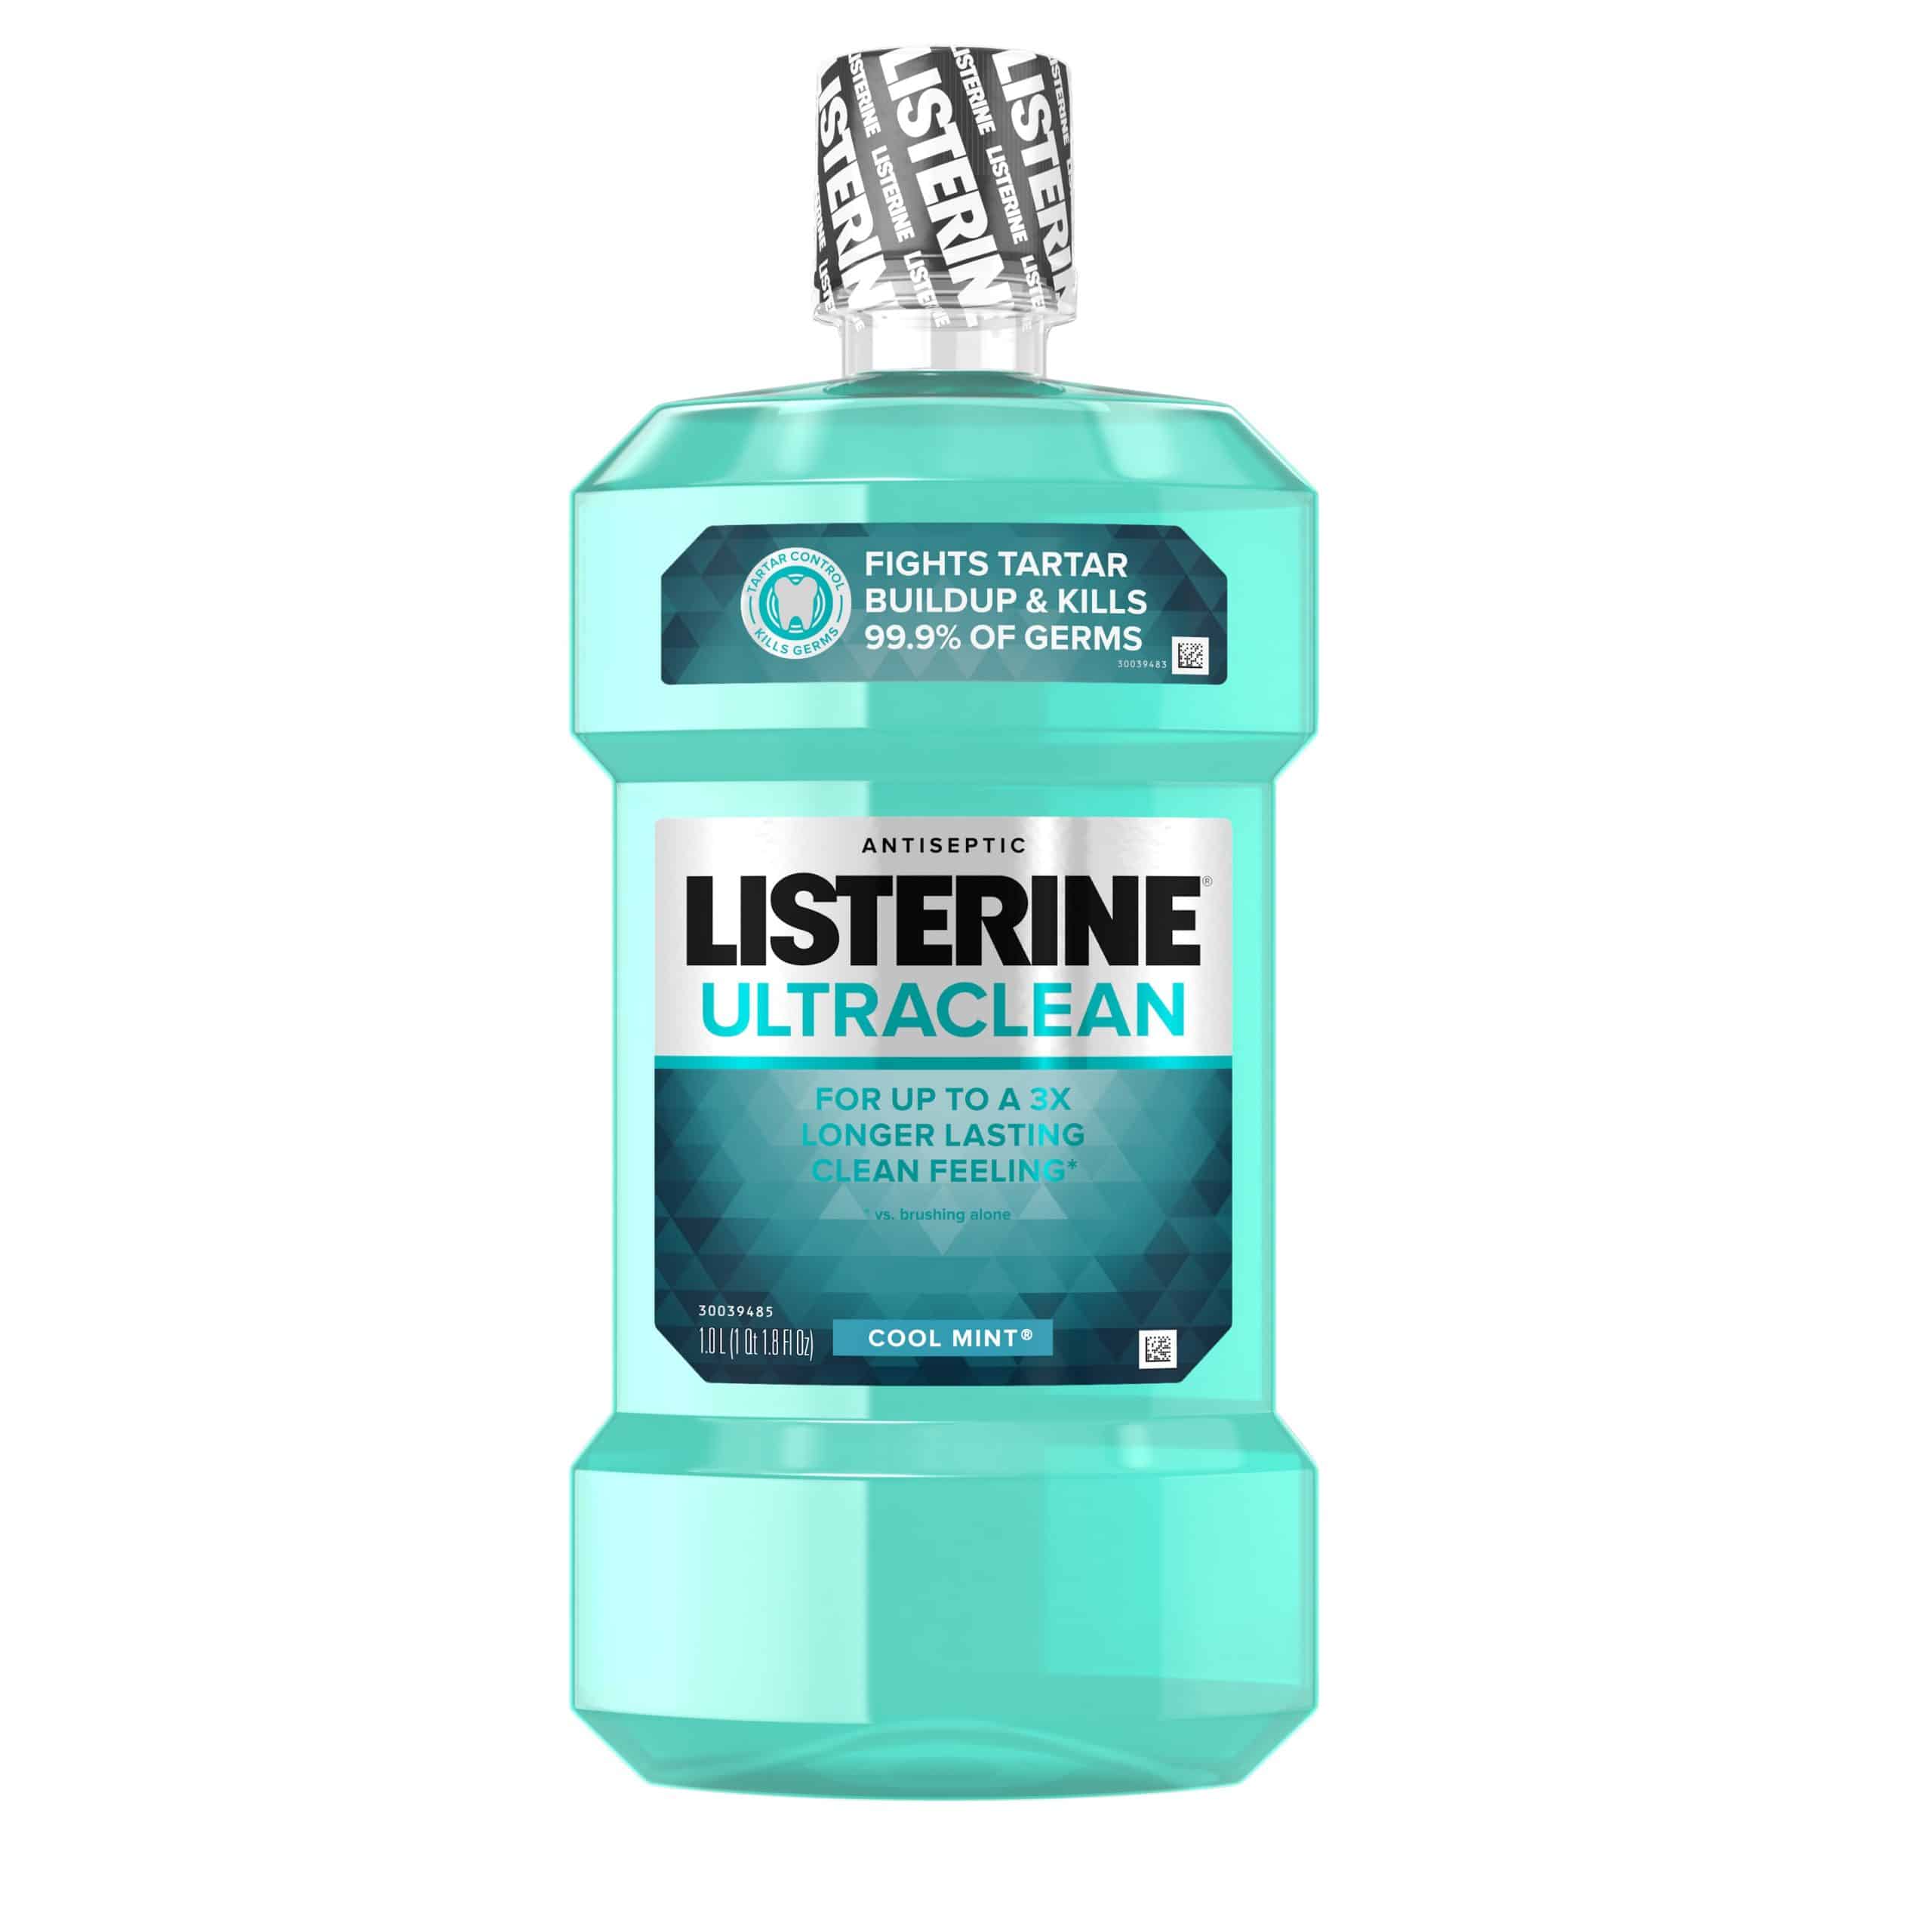 Listerine Ultraclean Oral Care Antiseptic Mouthwash Cool Mint, 1L